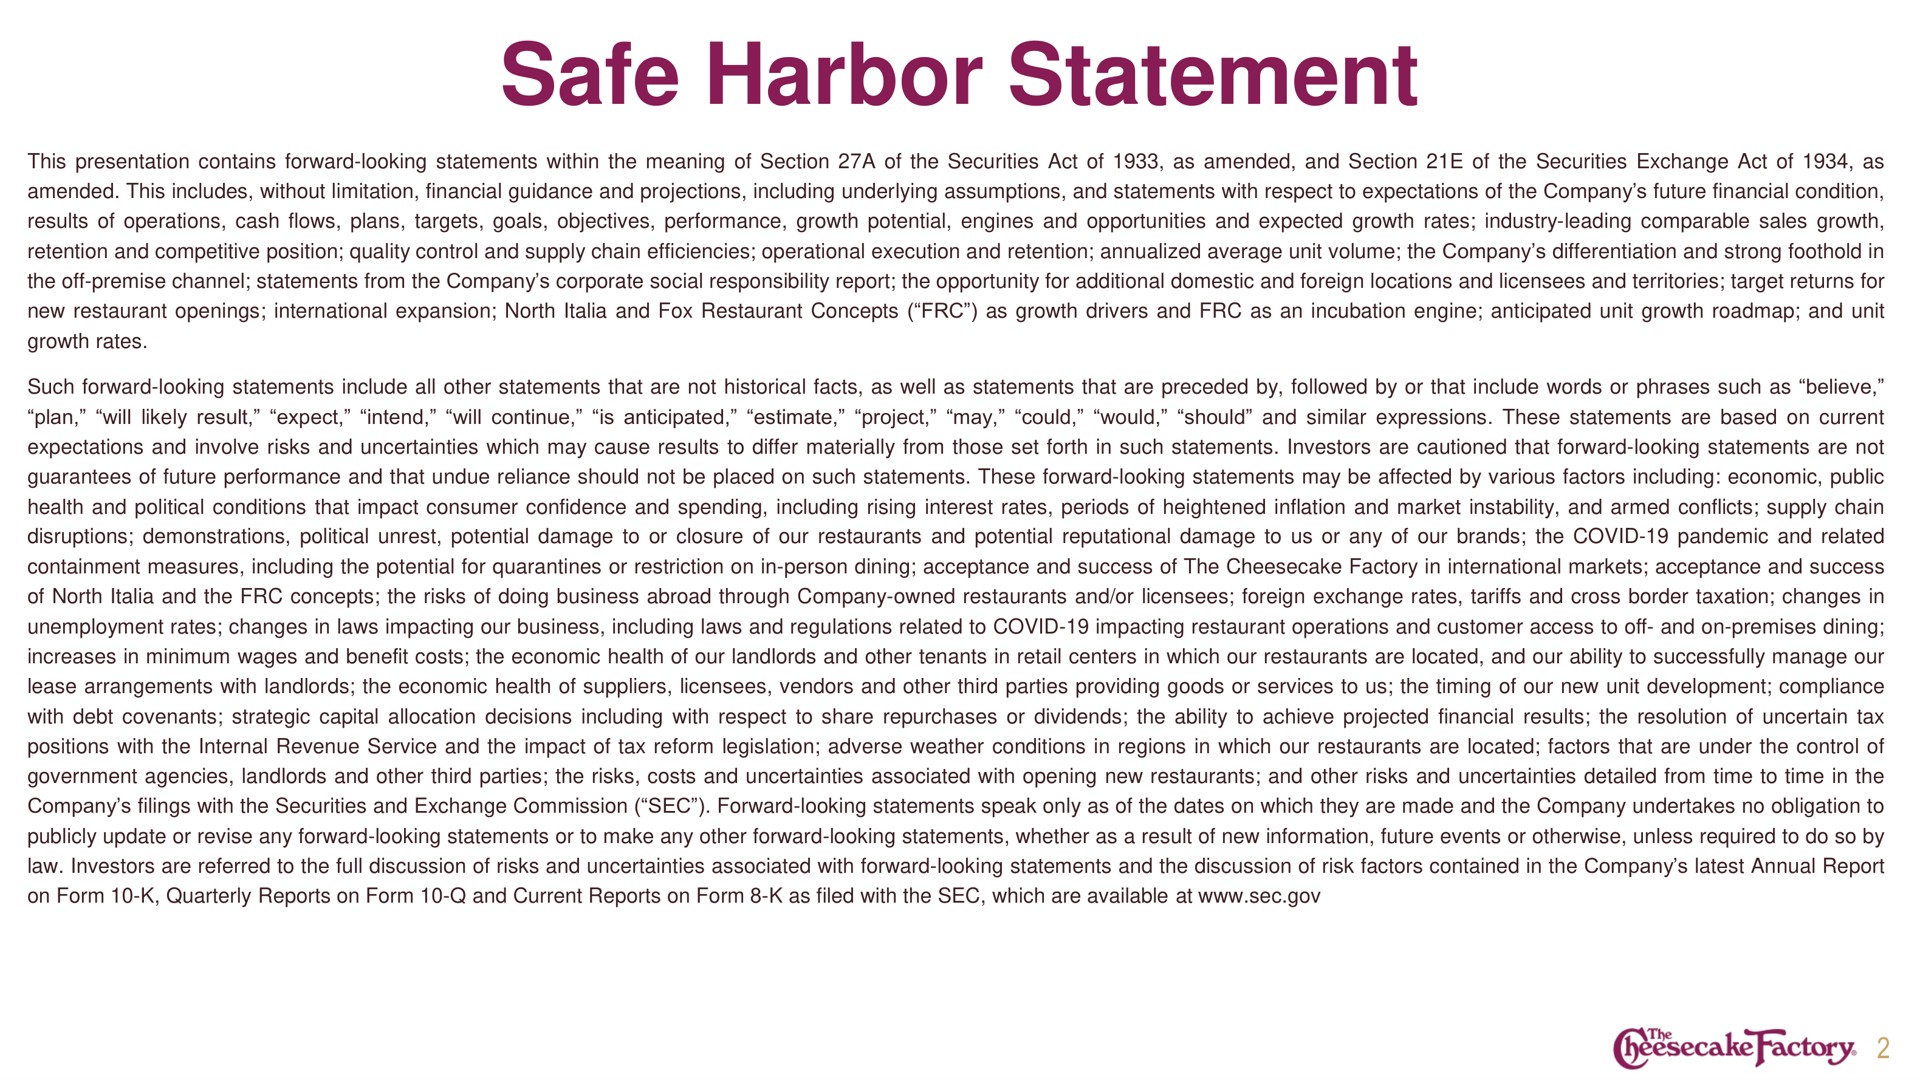 safe harbor statement | Cheesecake Factory